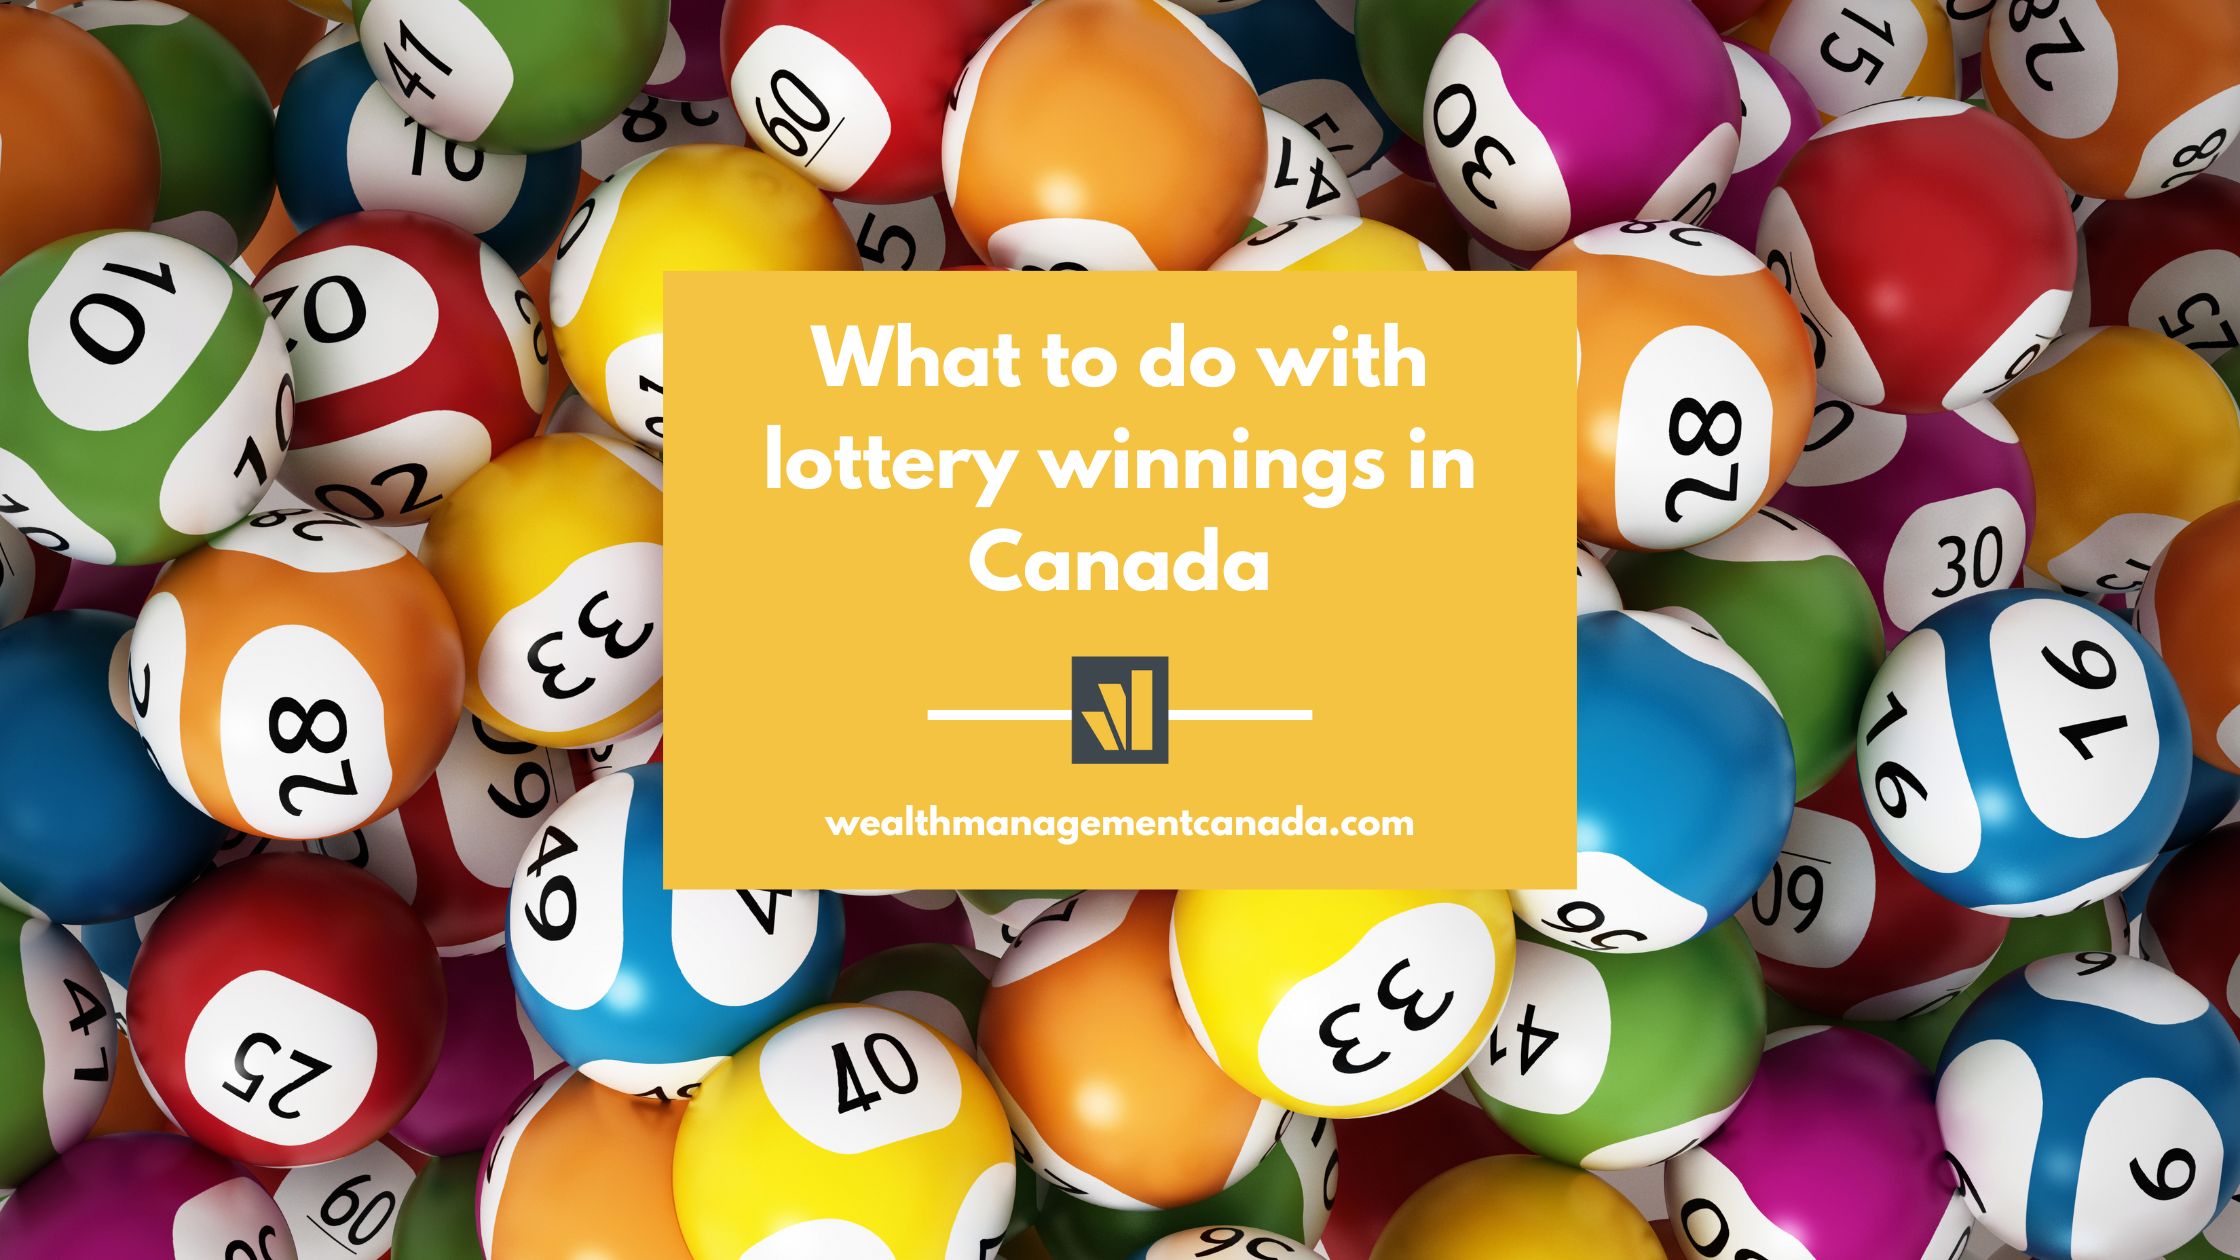 What-to-do-with-lottery-winnings-in-Canada.jpg